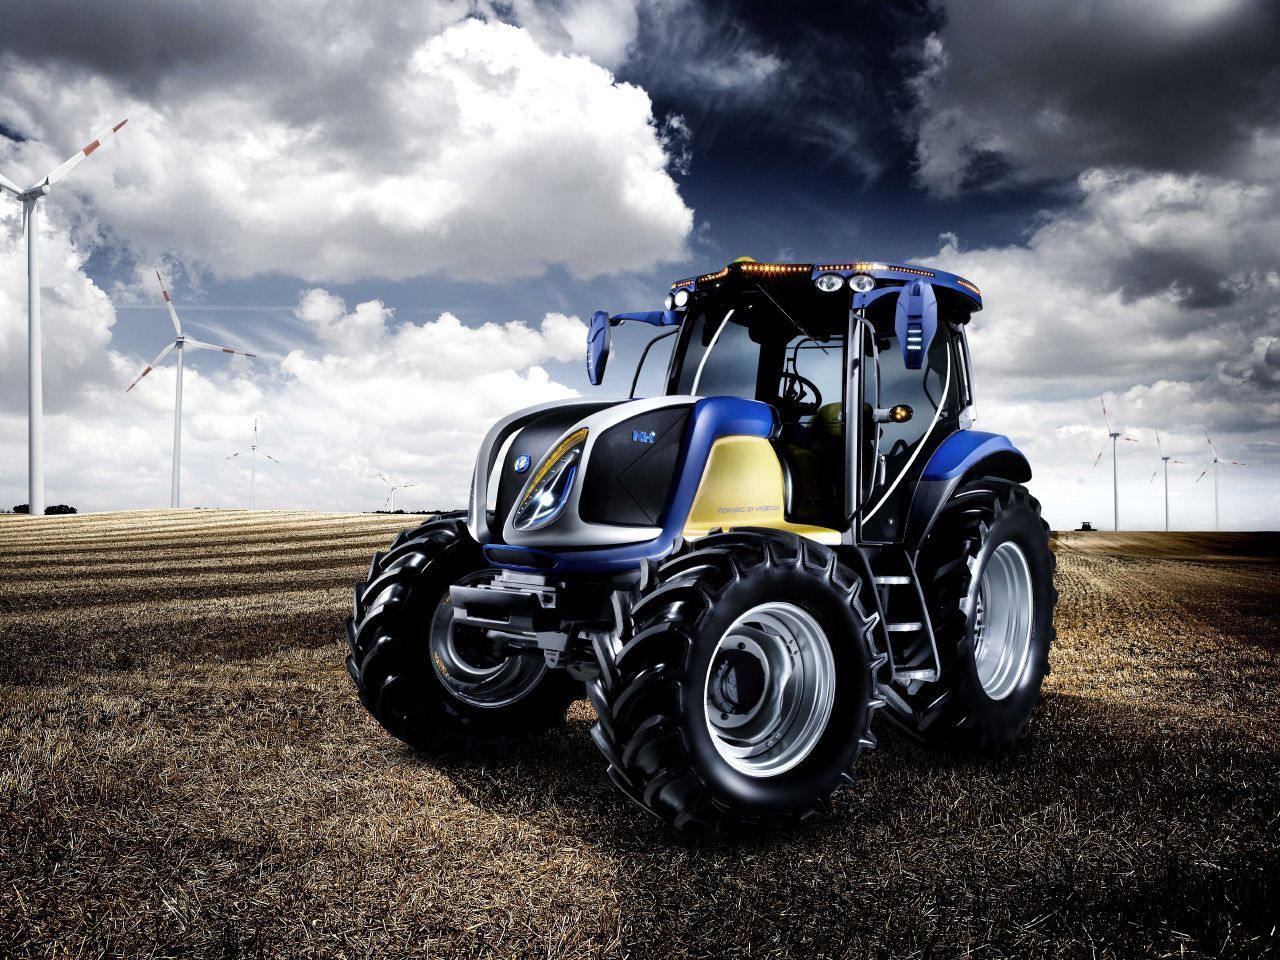 5 New Holland Tractor HD Wallpapers Backgrounds - Wallpaper Abyss